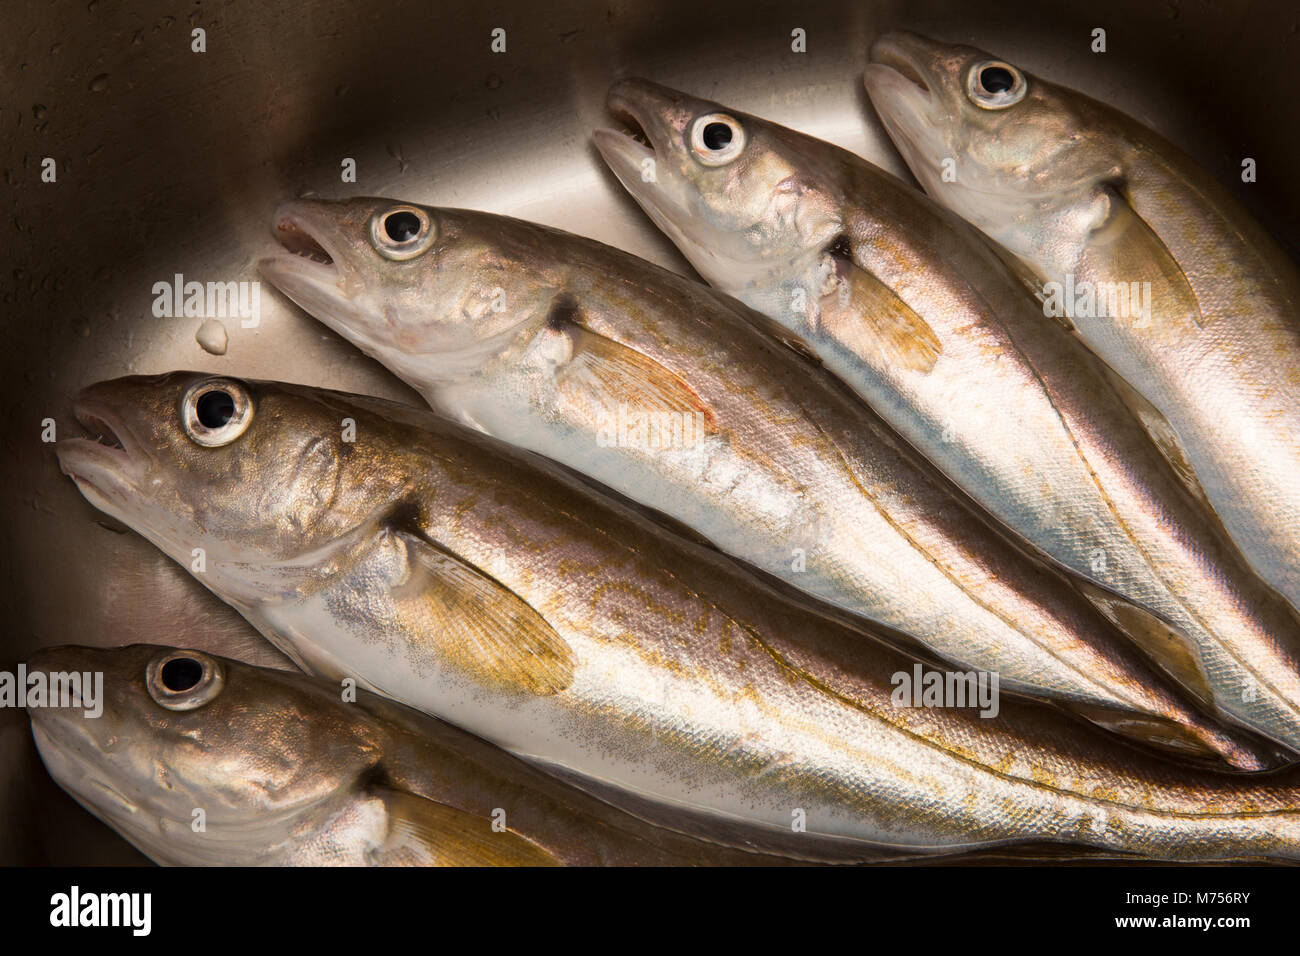 Whiting, merlangius merlangus-caught in Morecambe Bay North West England UK GB, ready to be prepared for cooking. Stock Photo